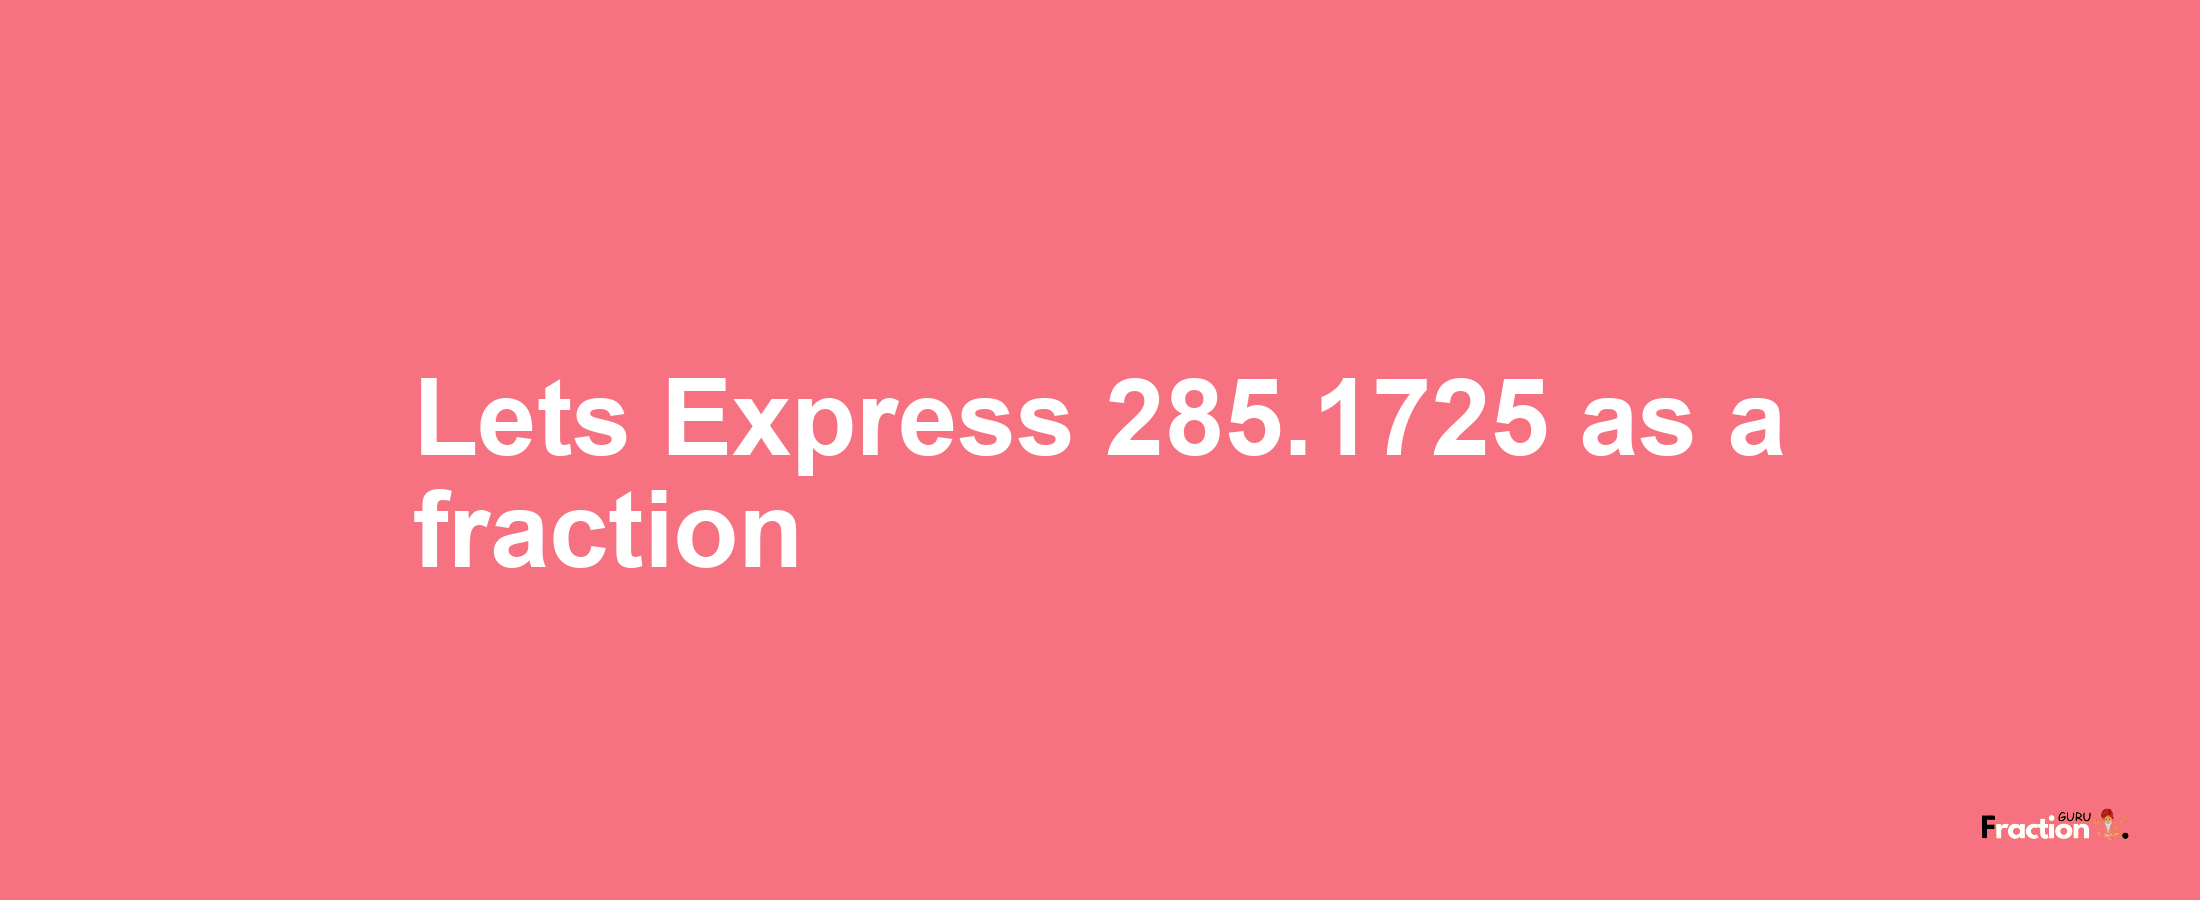 Lets Express 285.1725 as afraction